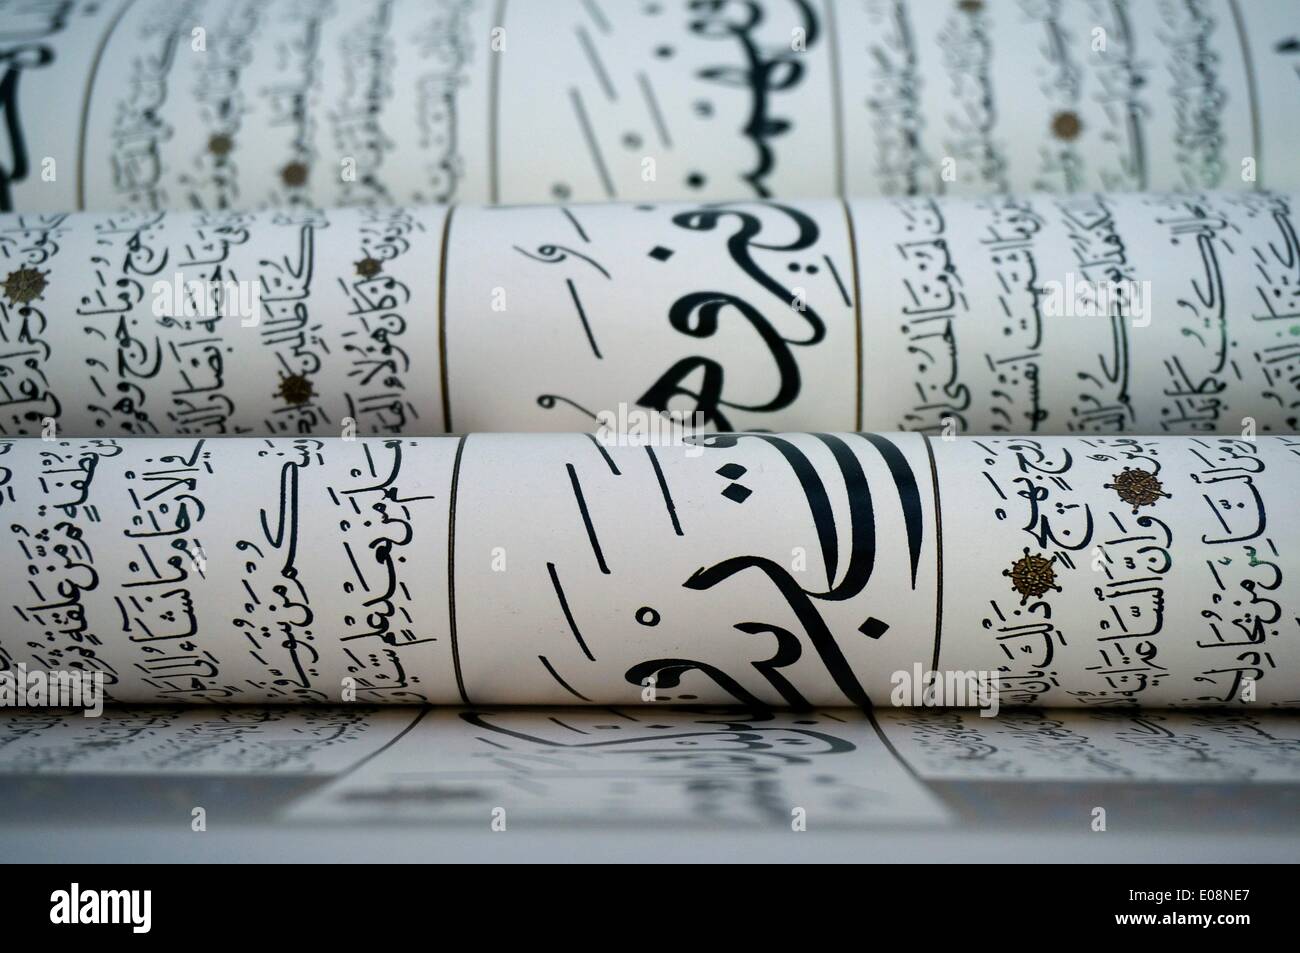 Paper rolls with Arabic writing in the Sehitlik Mosque in Berlin-Neukölln, Germany, 11 August 2013. Photo: Berliner Verlag/Steinach - NO WIRE SERVICE Stock Photo